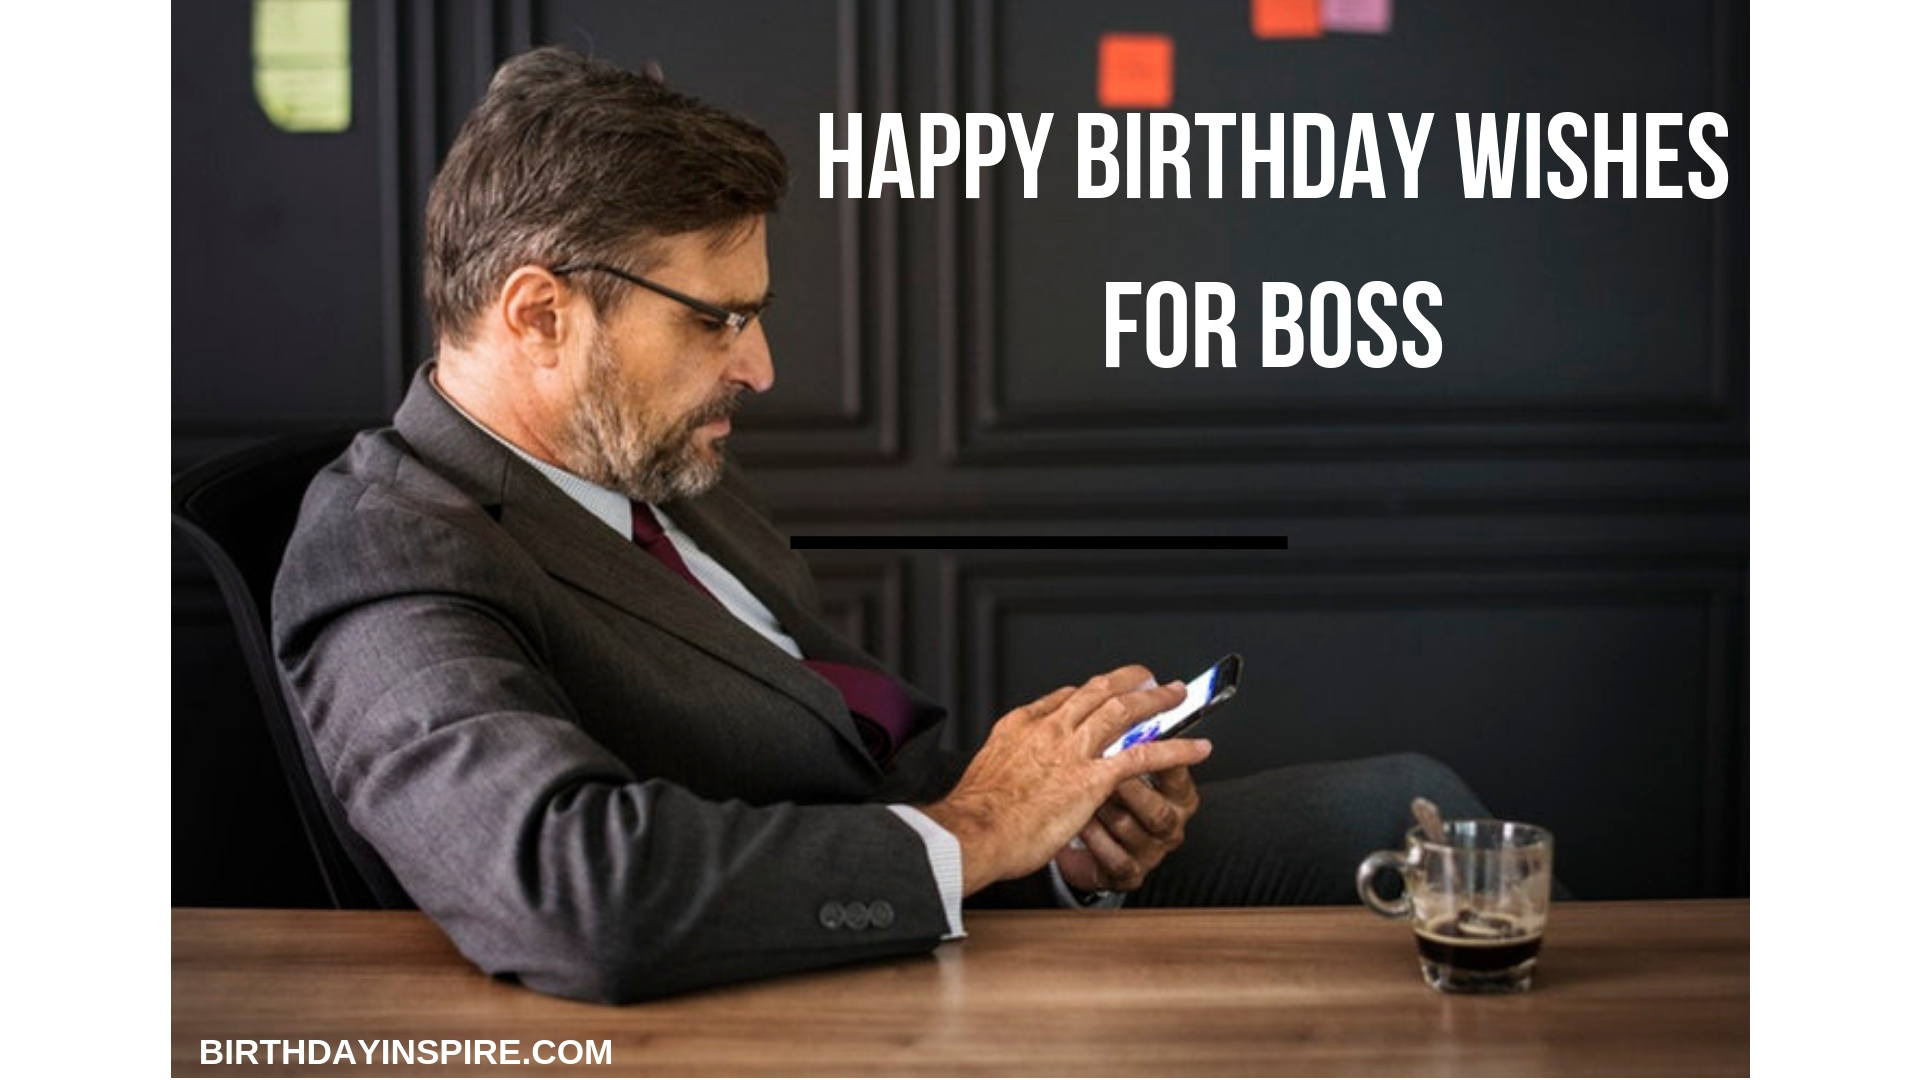 BIRTHDAY WISHES FOR BOSS